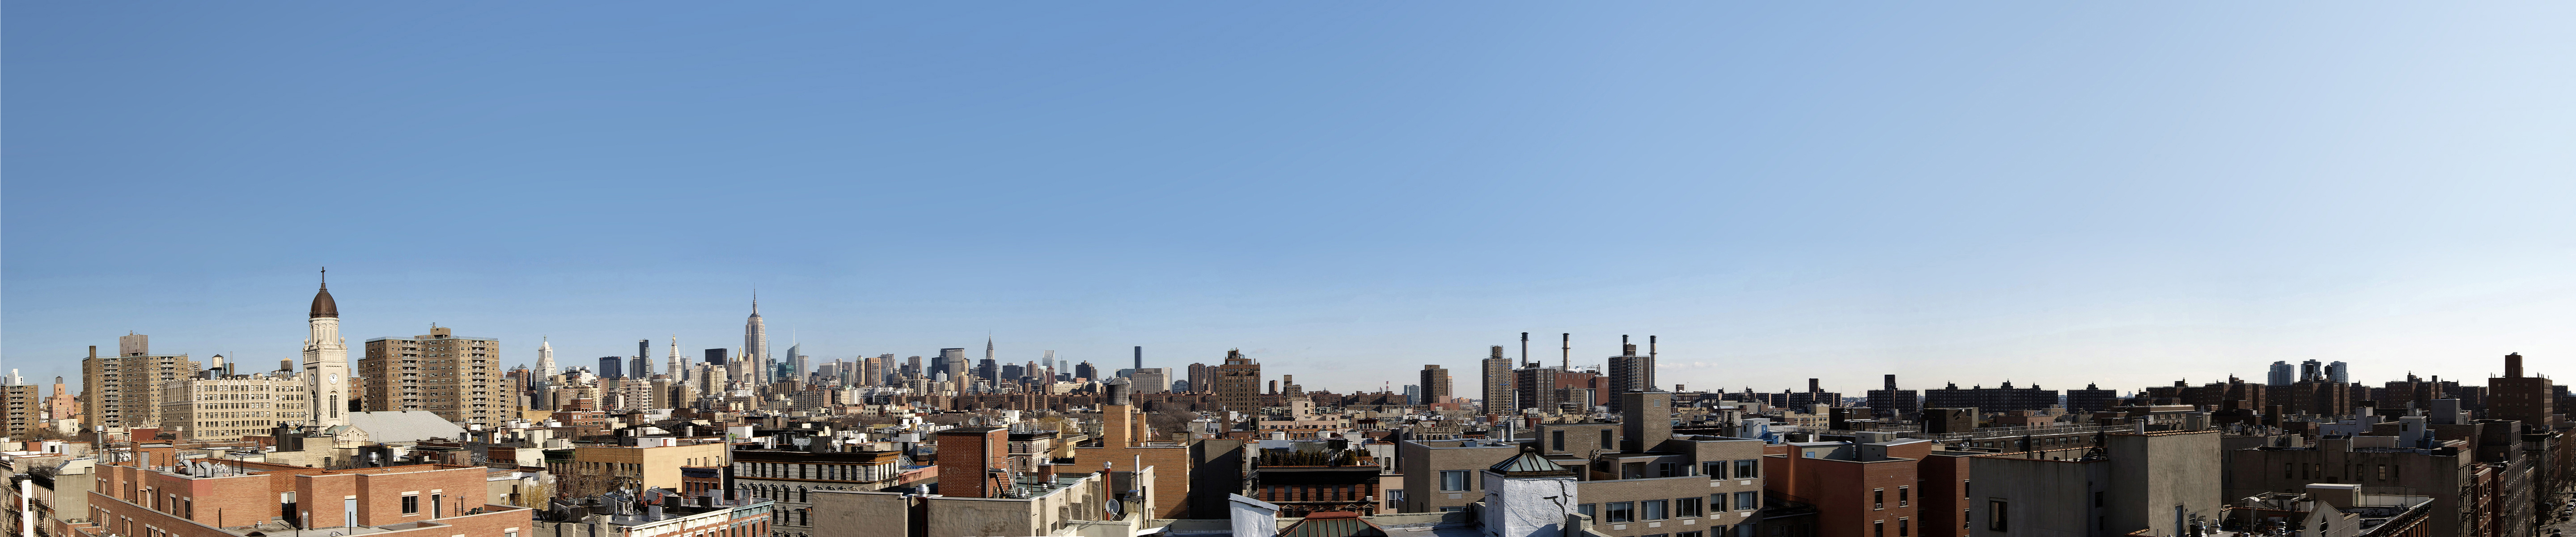 new york roofs